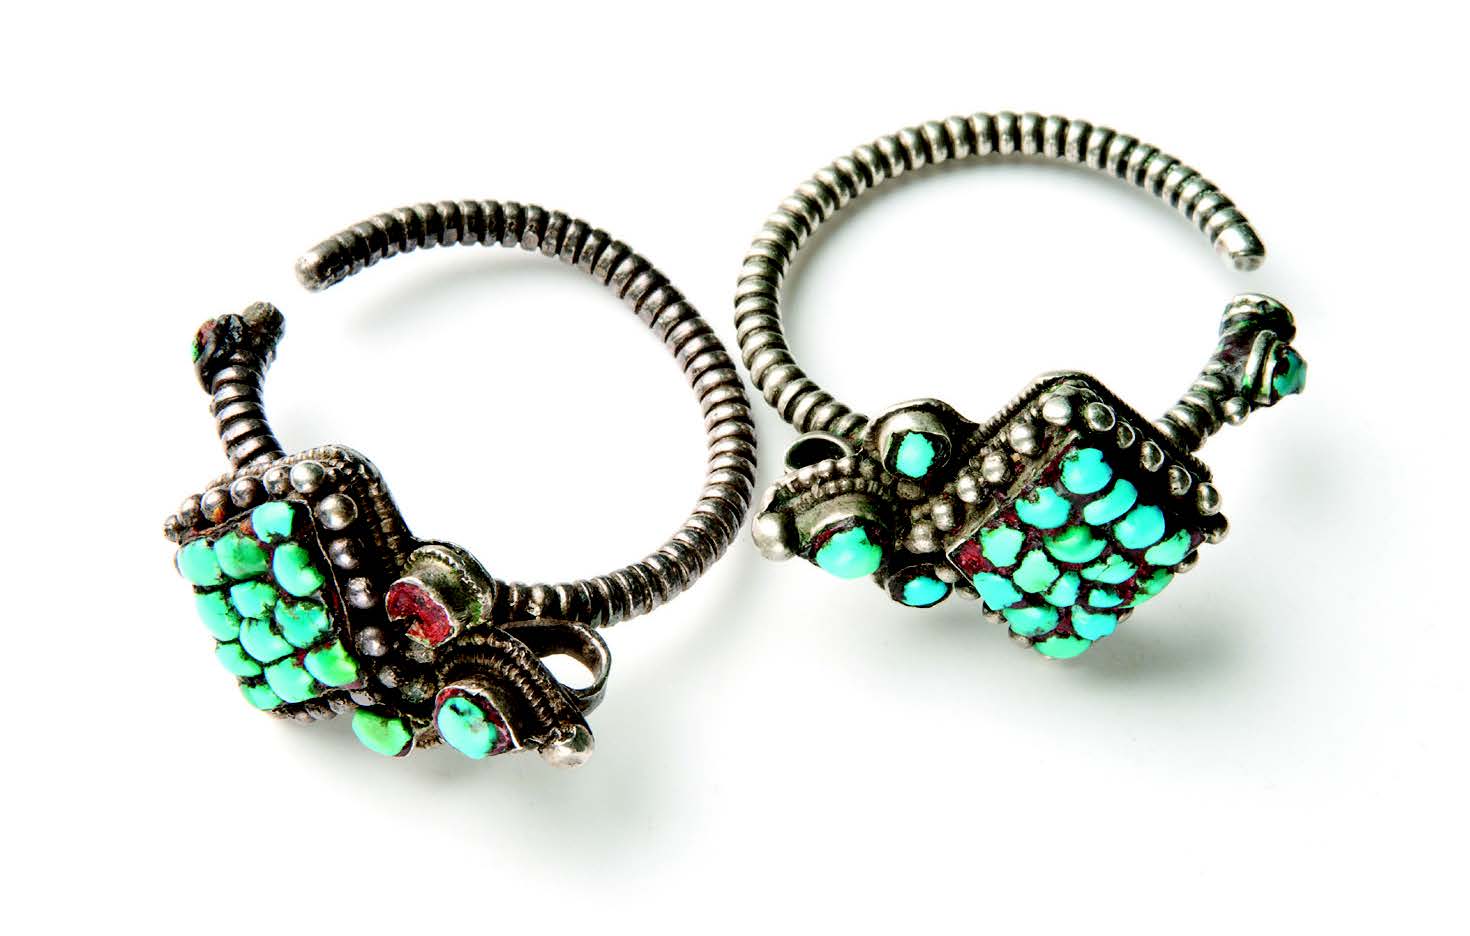 Pair of earrings (probably men’s). Large and/or heavy earrings such as these are tied into the hair by a string, which attaches to the earring by the loop behind the turquoise stones. Silver, turquoise, and wax. Tibet, early twentieth century. Museum of International Folk Art, gift of Cameron Peters (A.2013.7.1ab). Photograph by Blair Clark.